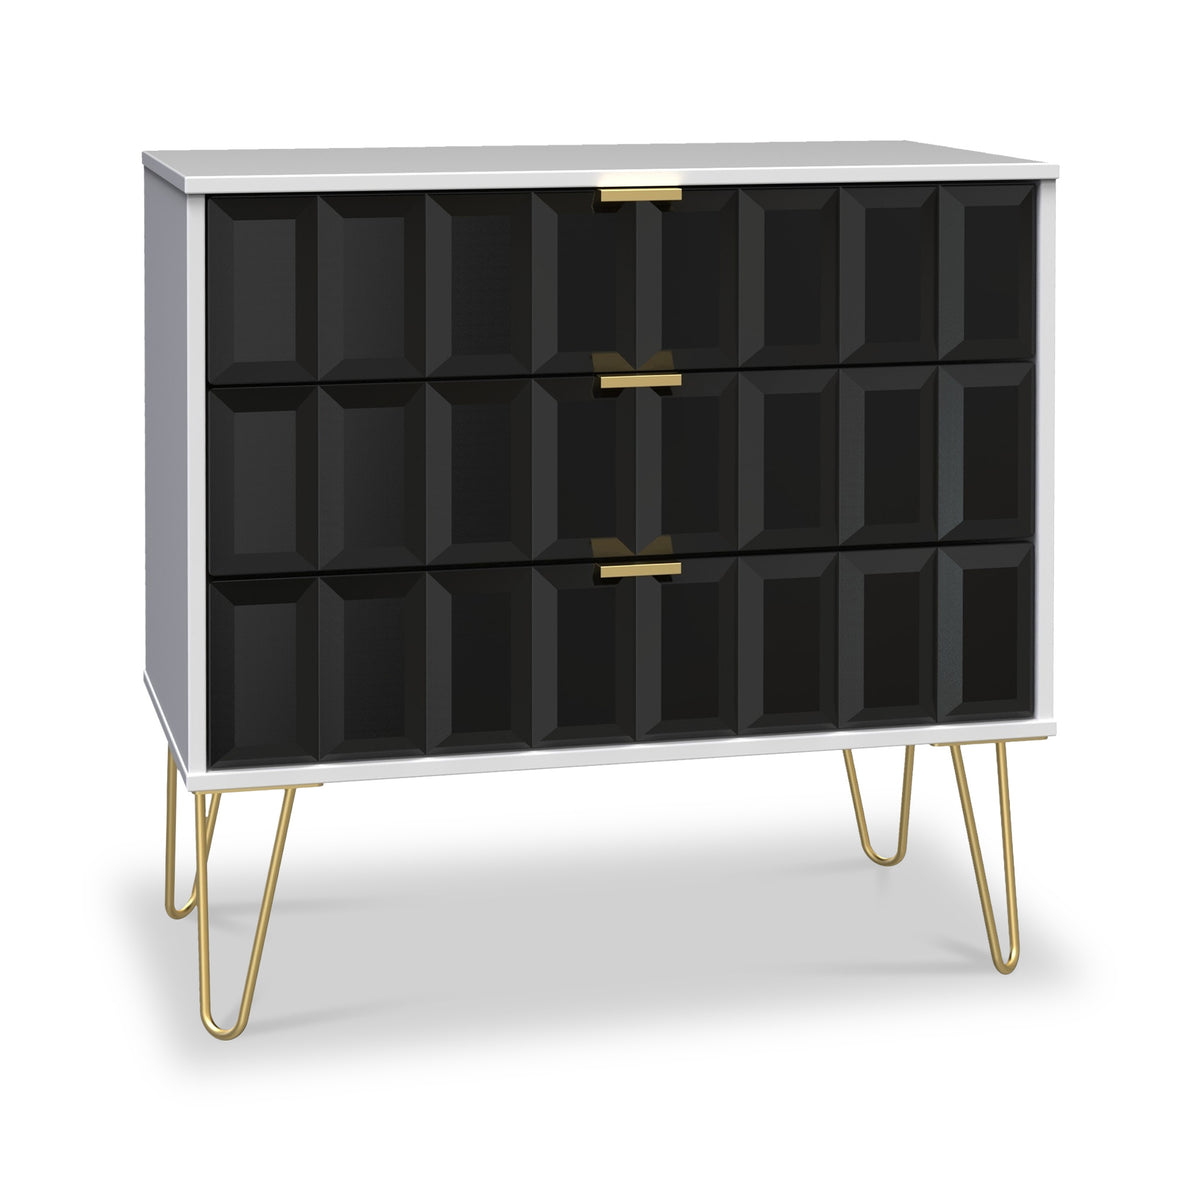 Harlow Black & White 3 Drawer Chest with Gold Hairpin Legs from Roseland